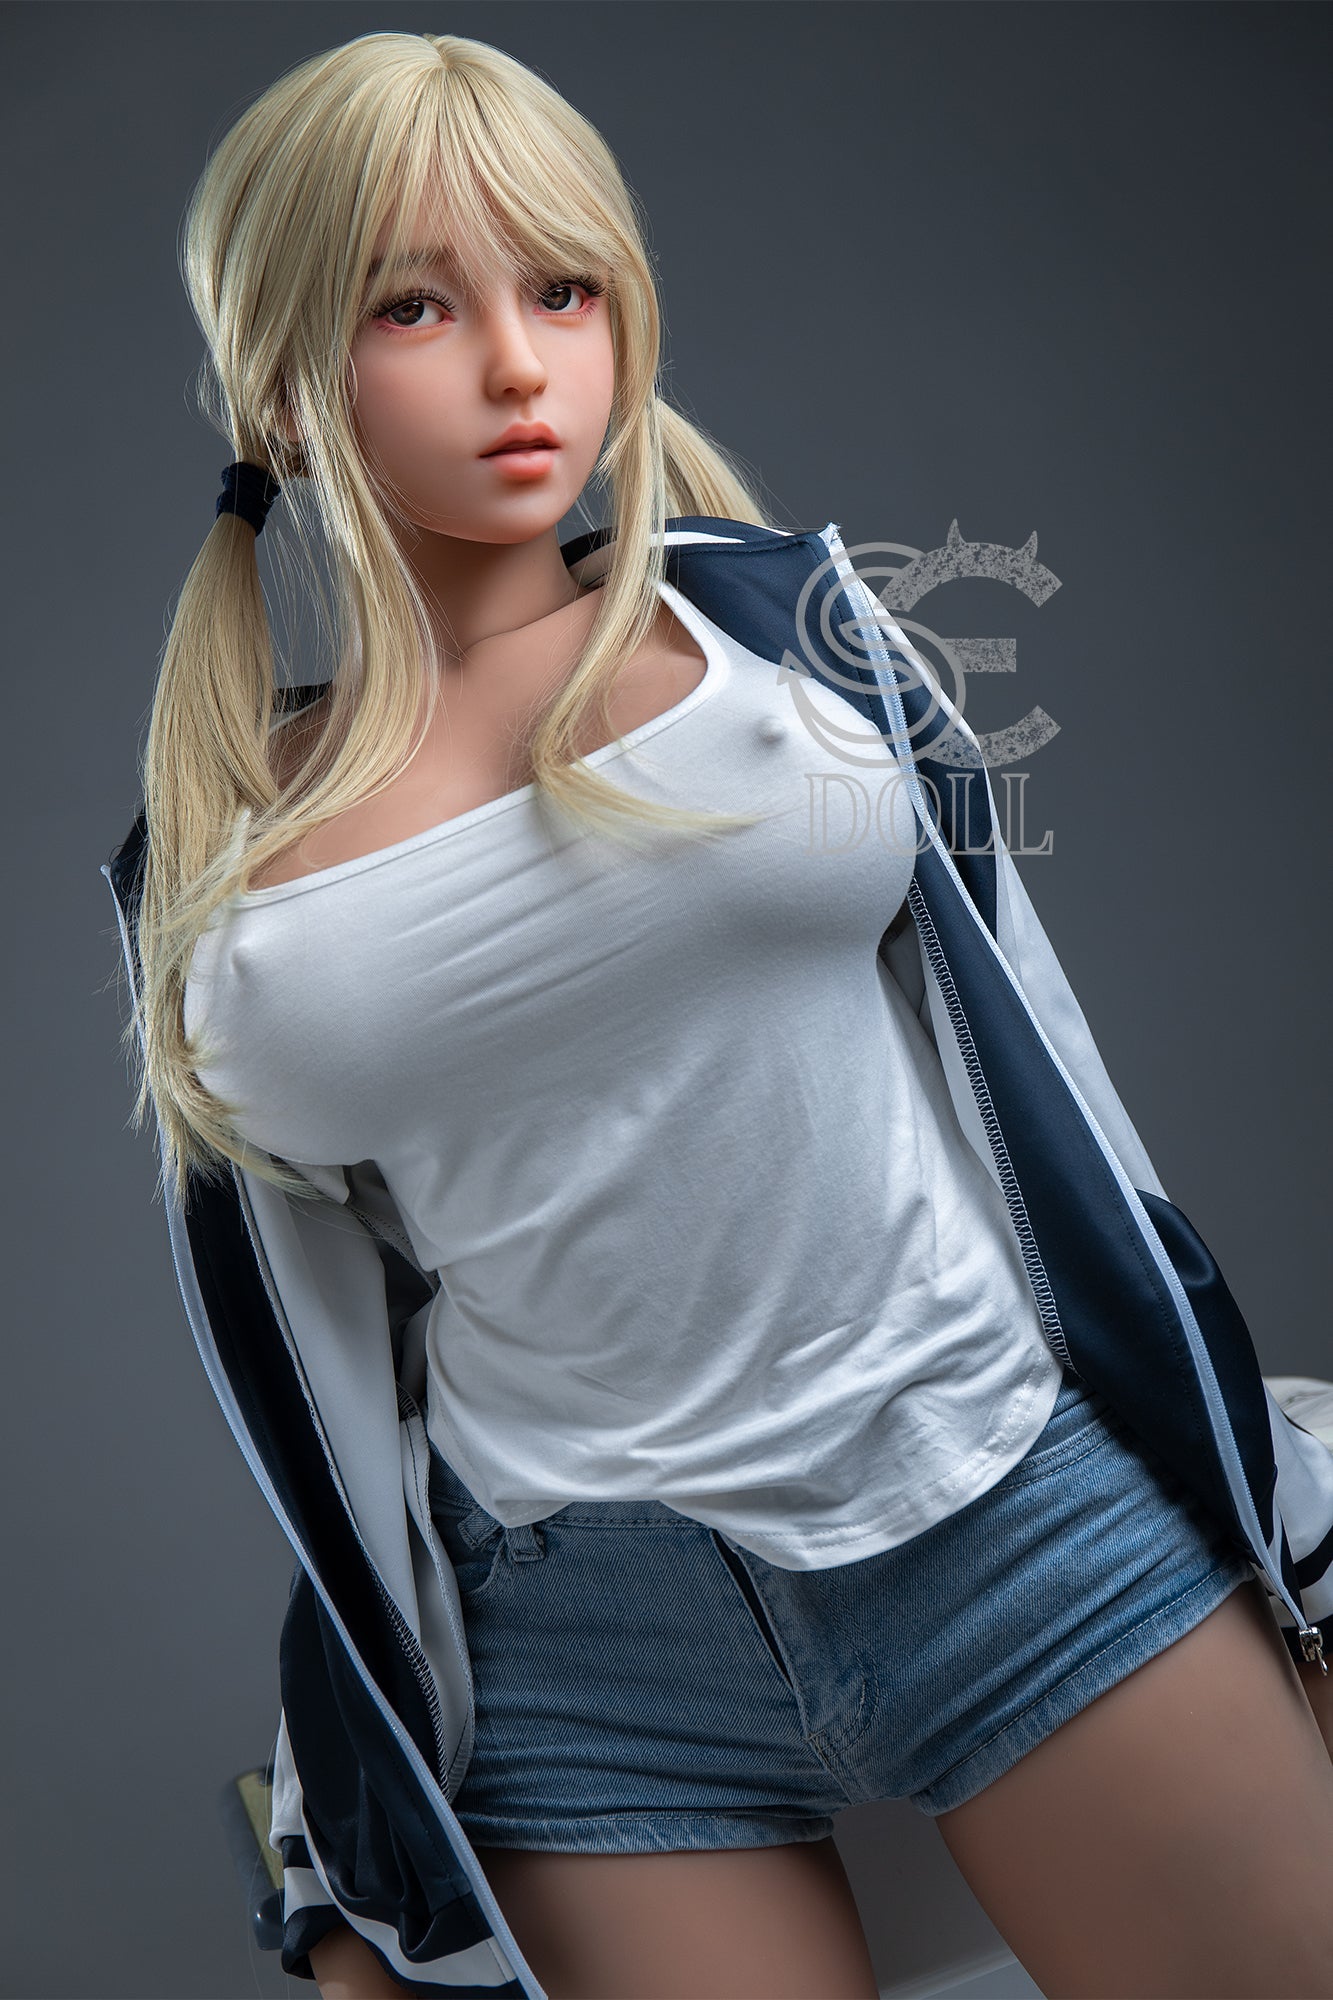 SEDOLL 157 cm H TPE - Melody | Buy Sex Dolls at DOLLS ACTUALLY